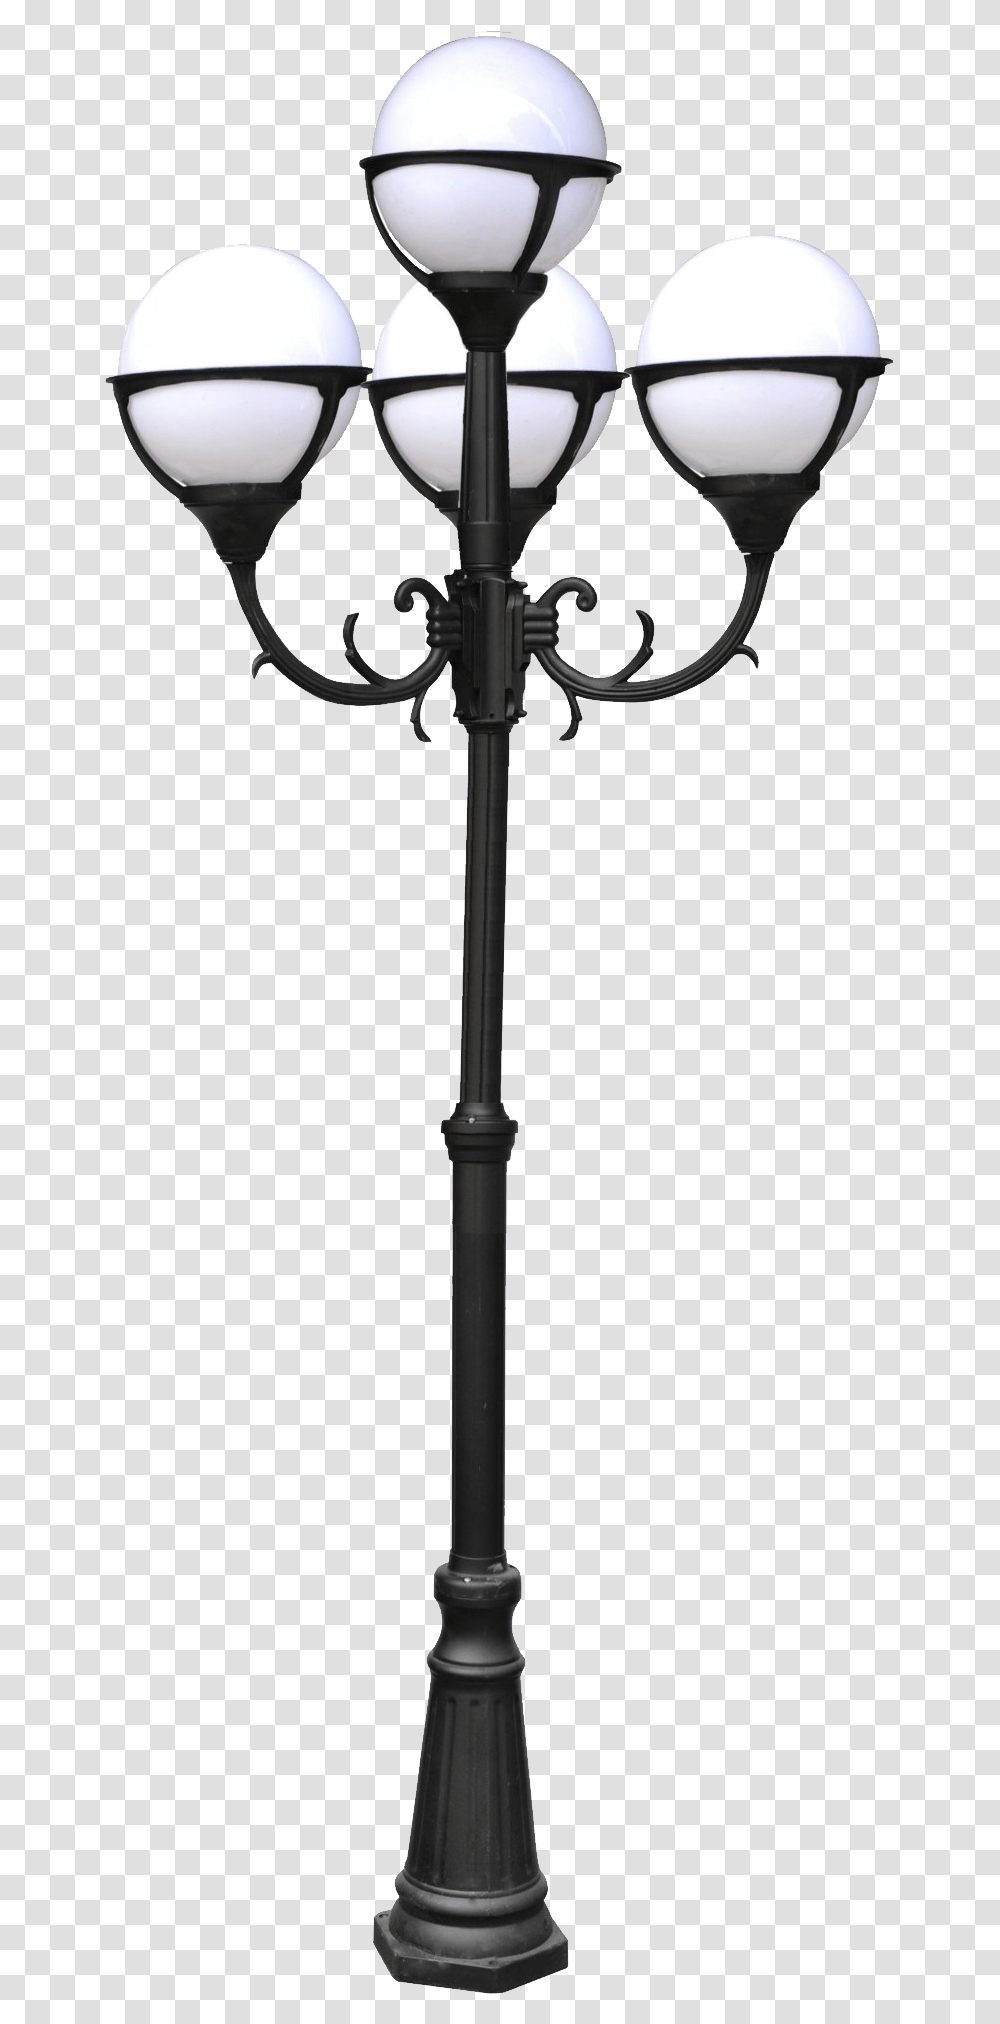 Street Light Hd, Lamp, Lamp Post, Weapon, Weaponry Transparent Png